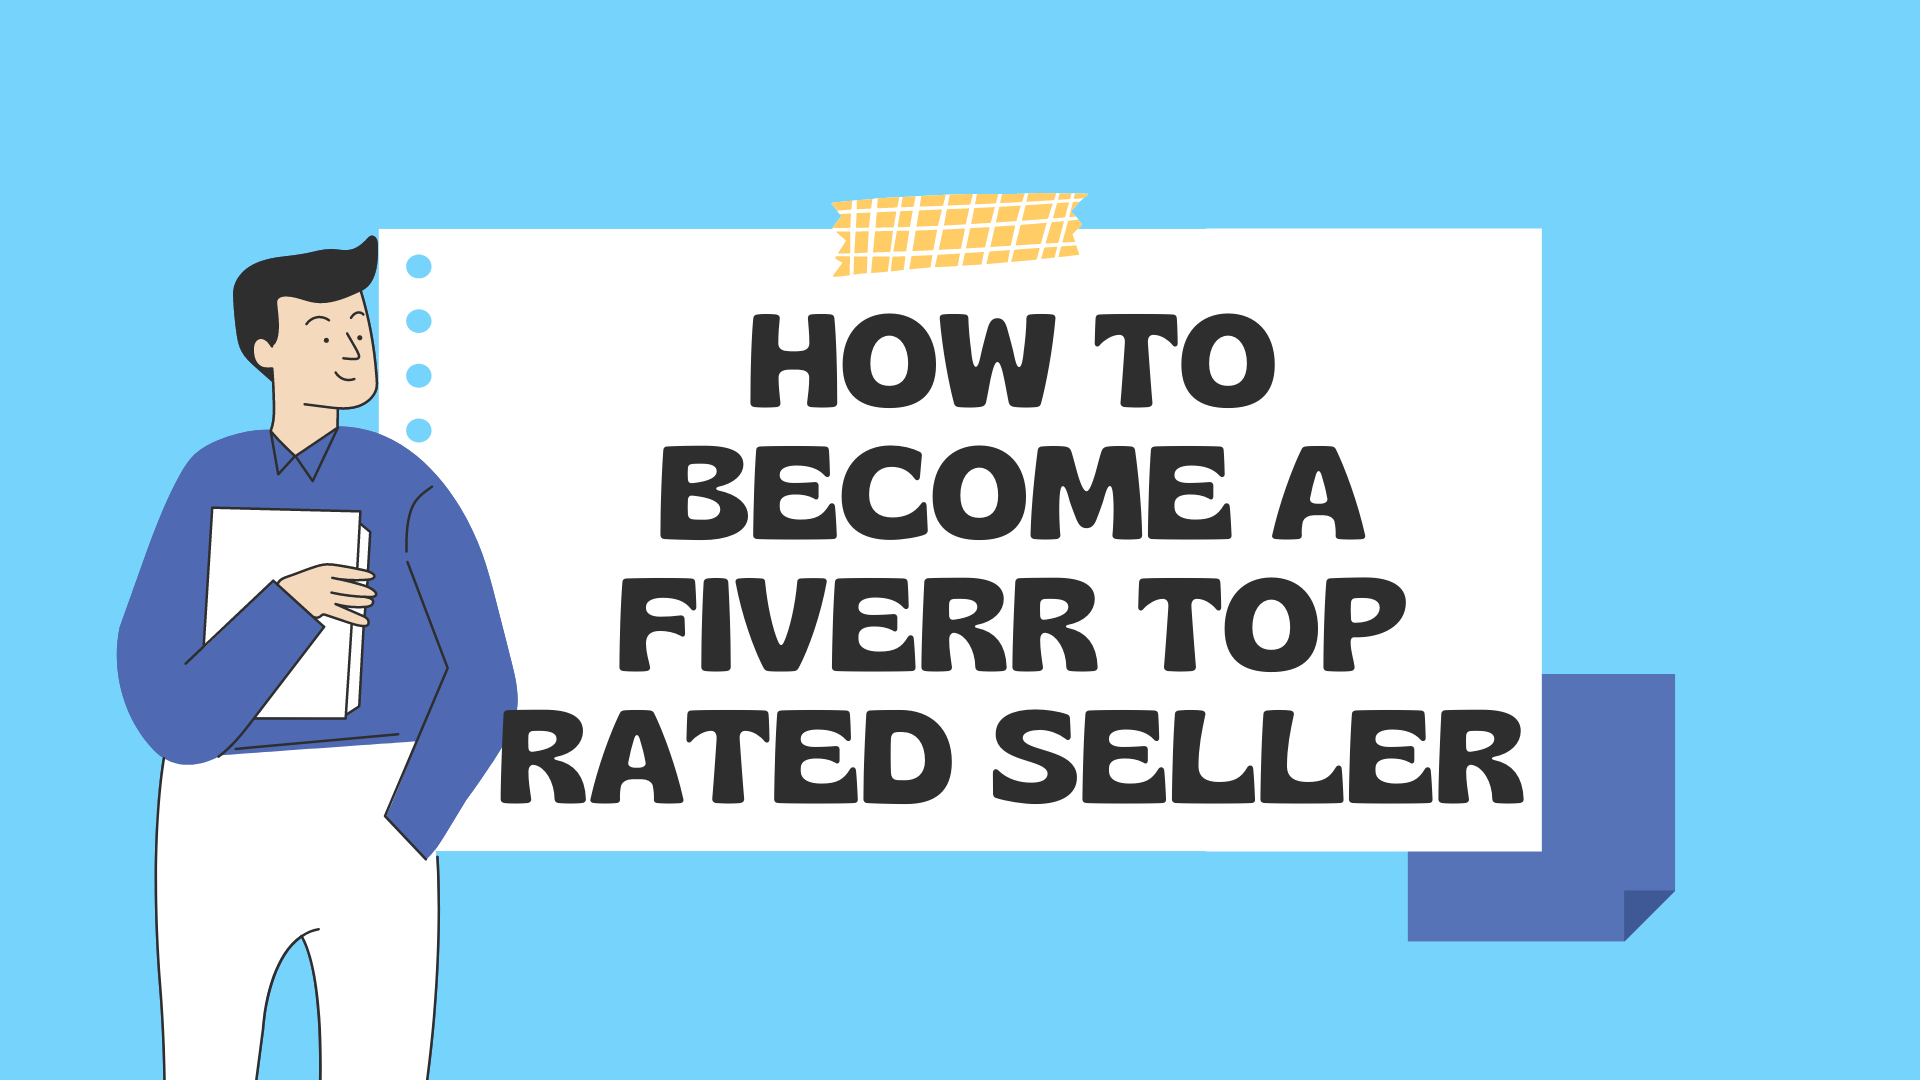 How To Become a Fiverr Top Rated Seller